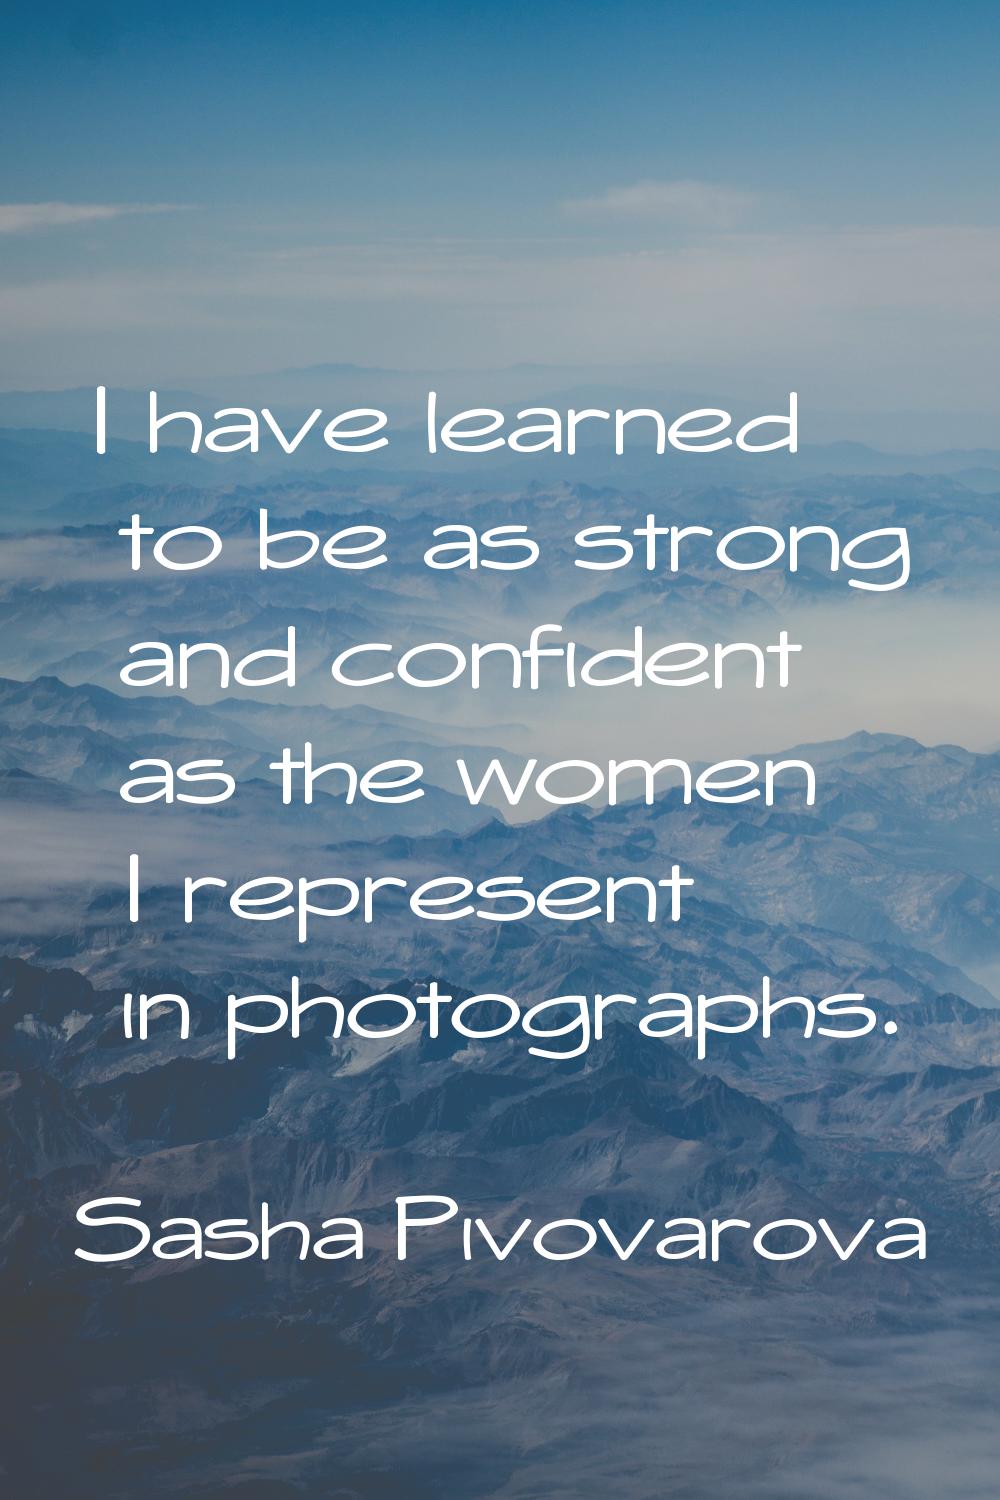 I have learned to be as strong and confident as the women I represent in photographs.